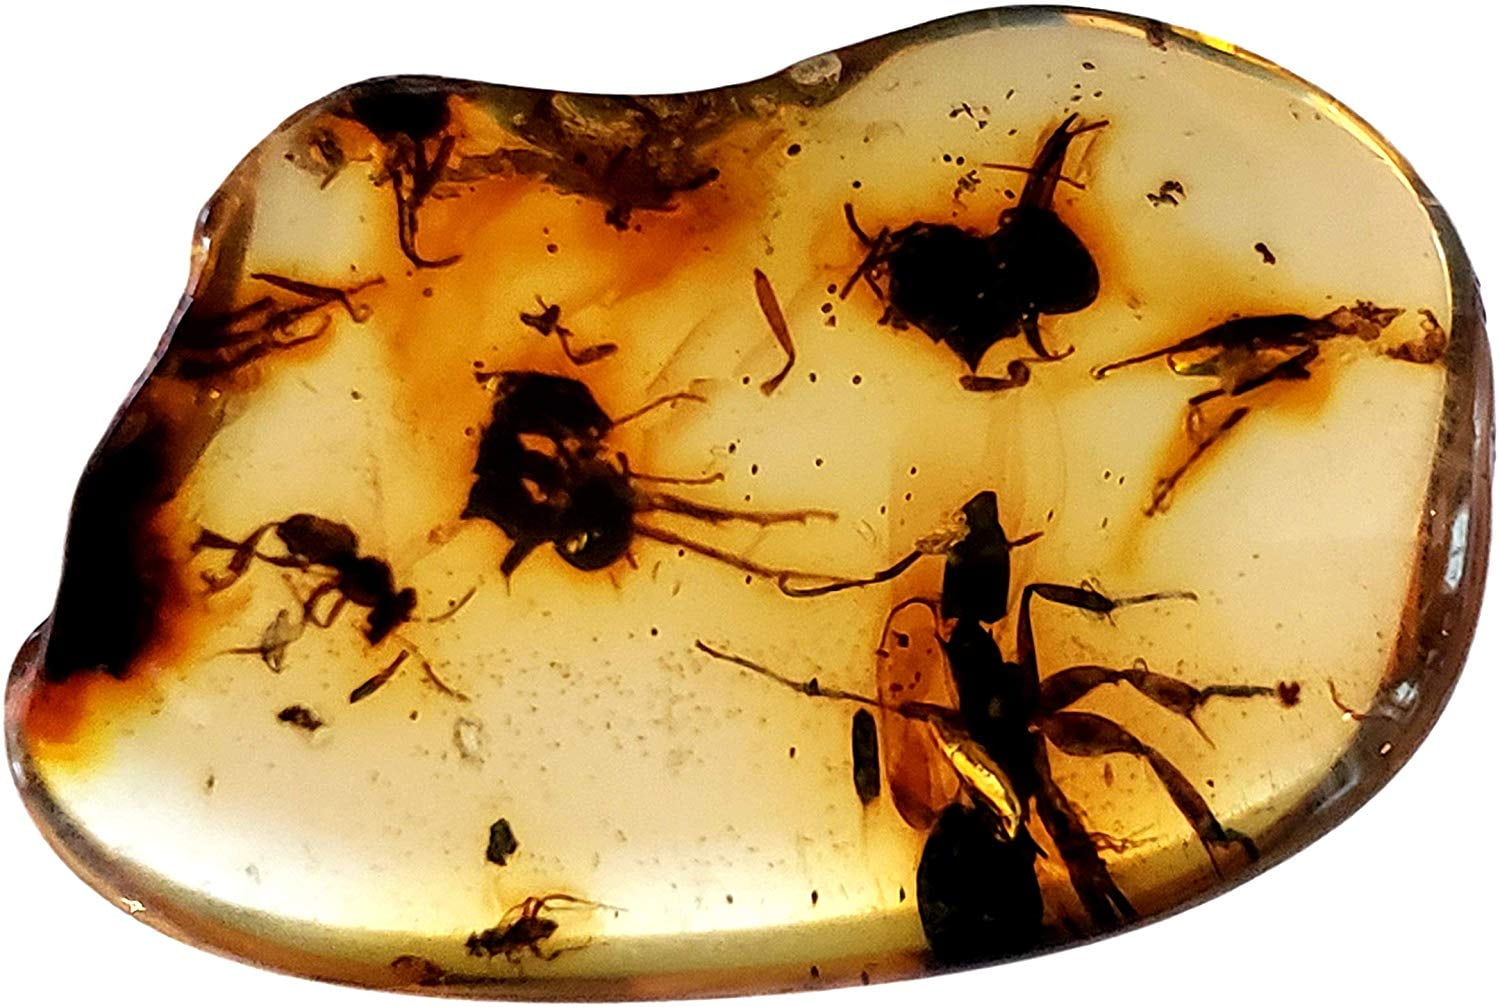 Fossilized Tree Resin Amber with Bugs in it